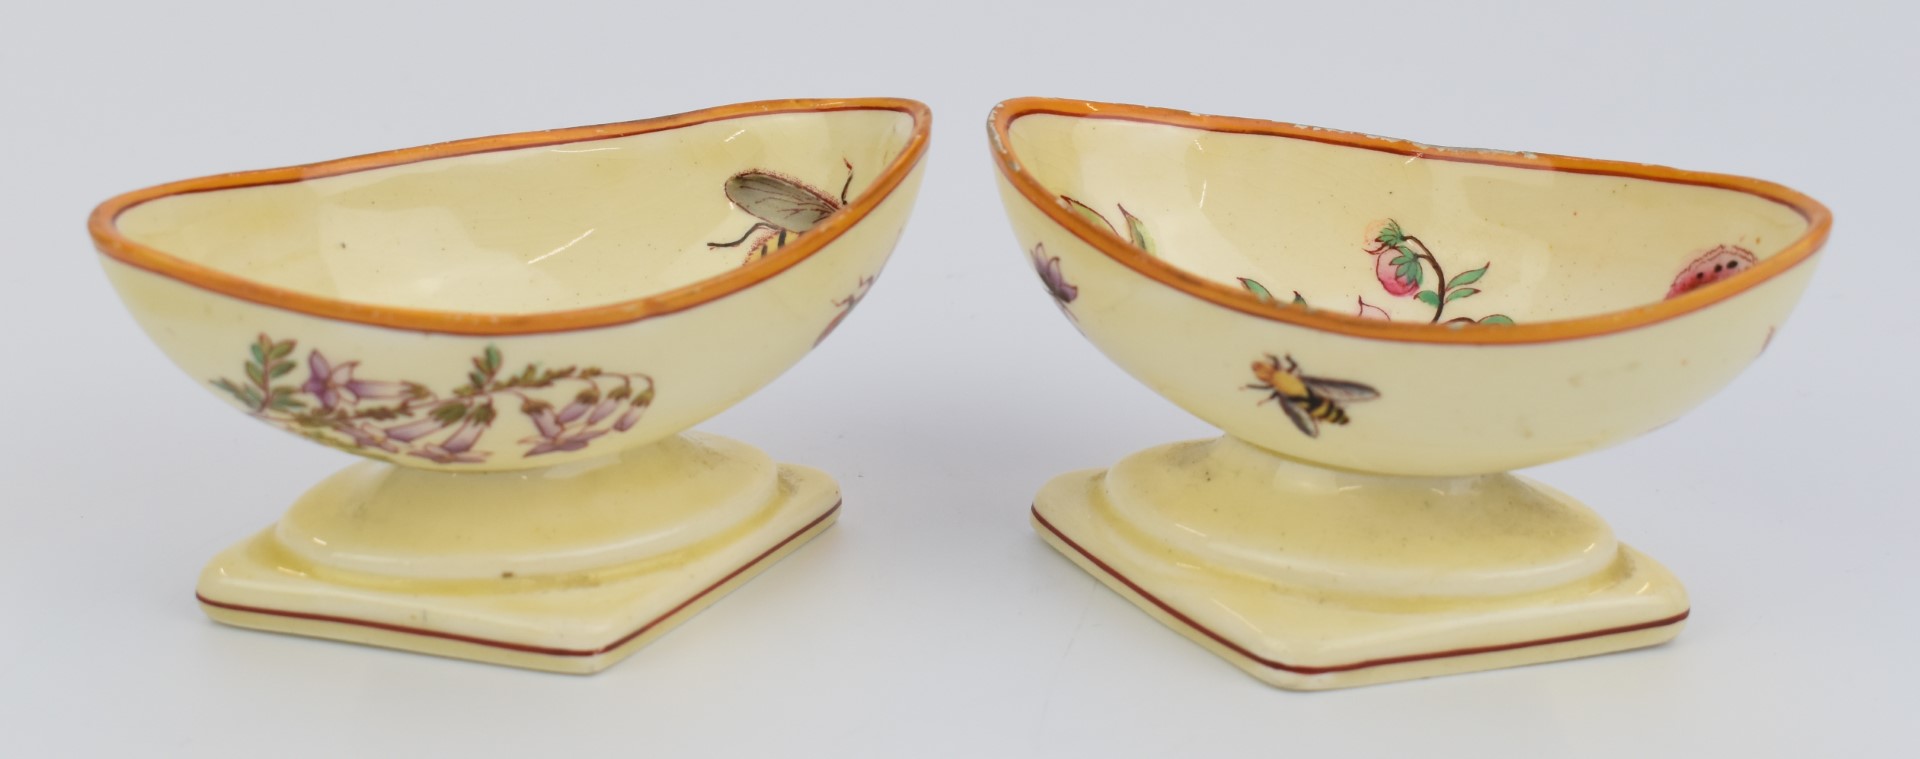 Pair of early 19thC Wedgwood creamware pedestal oval salts decorated with flowers and insects